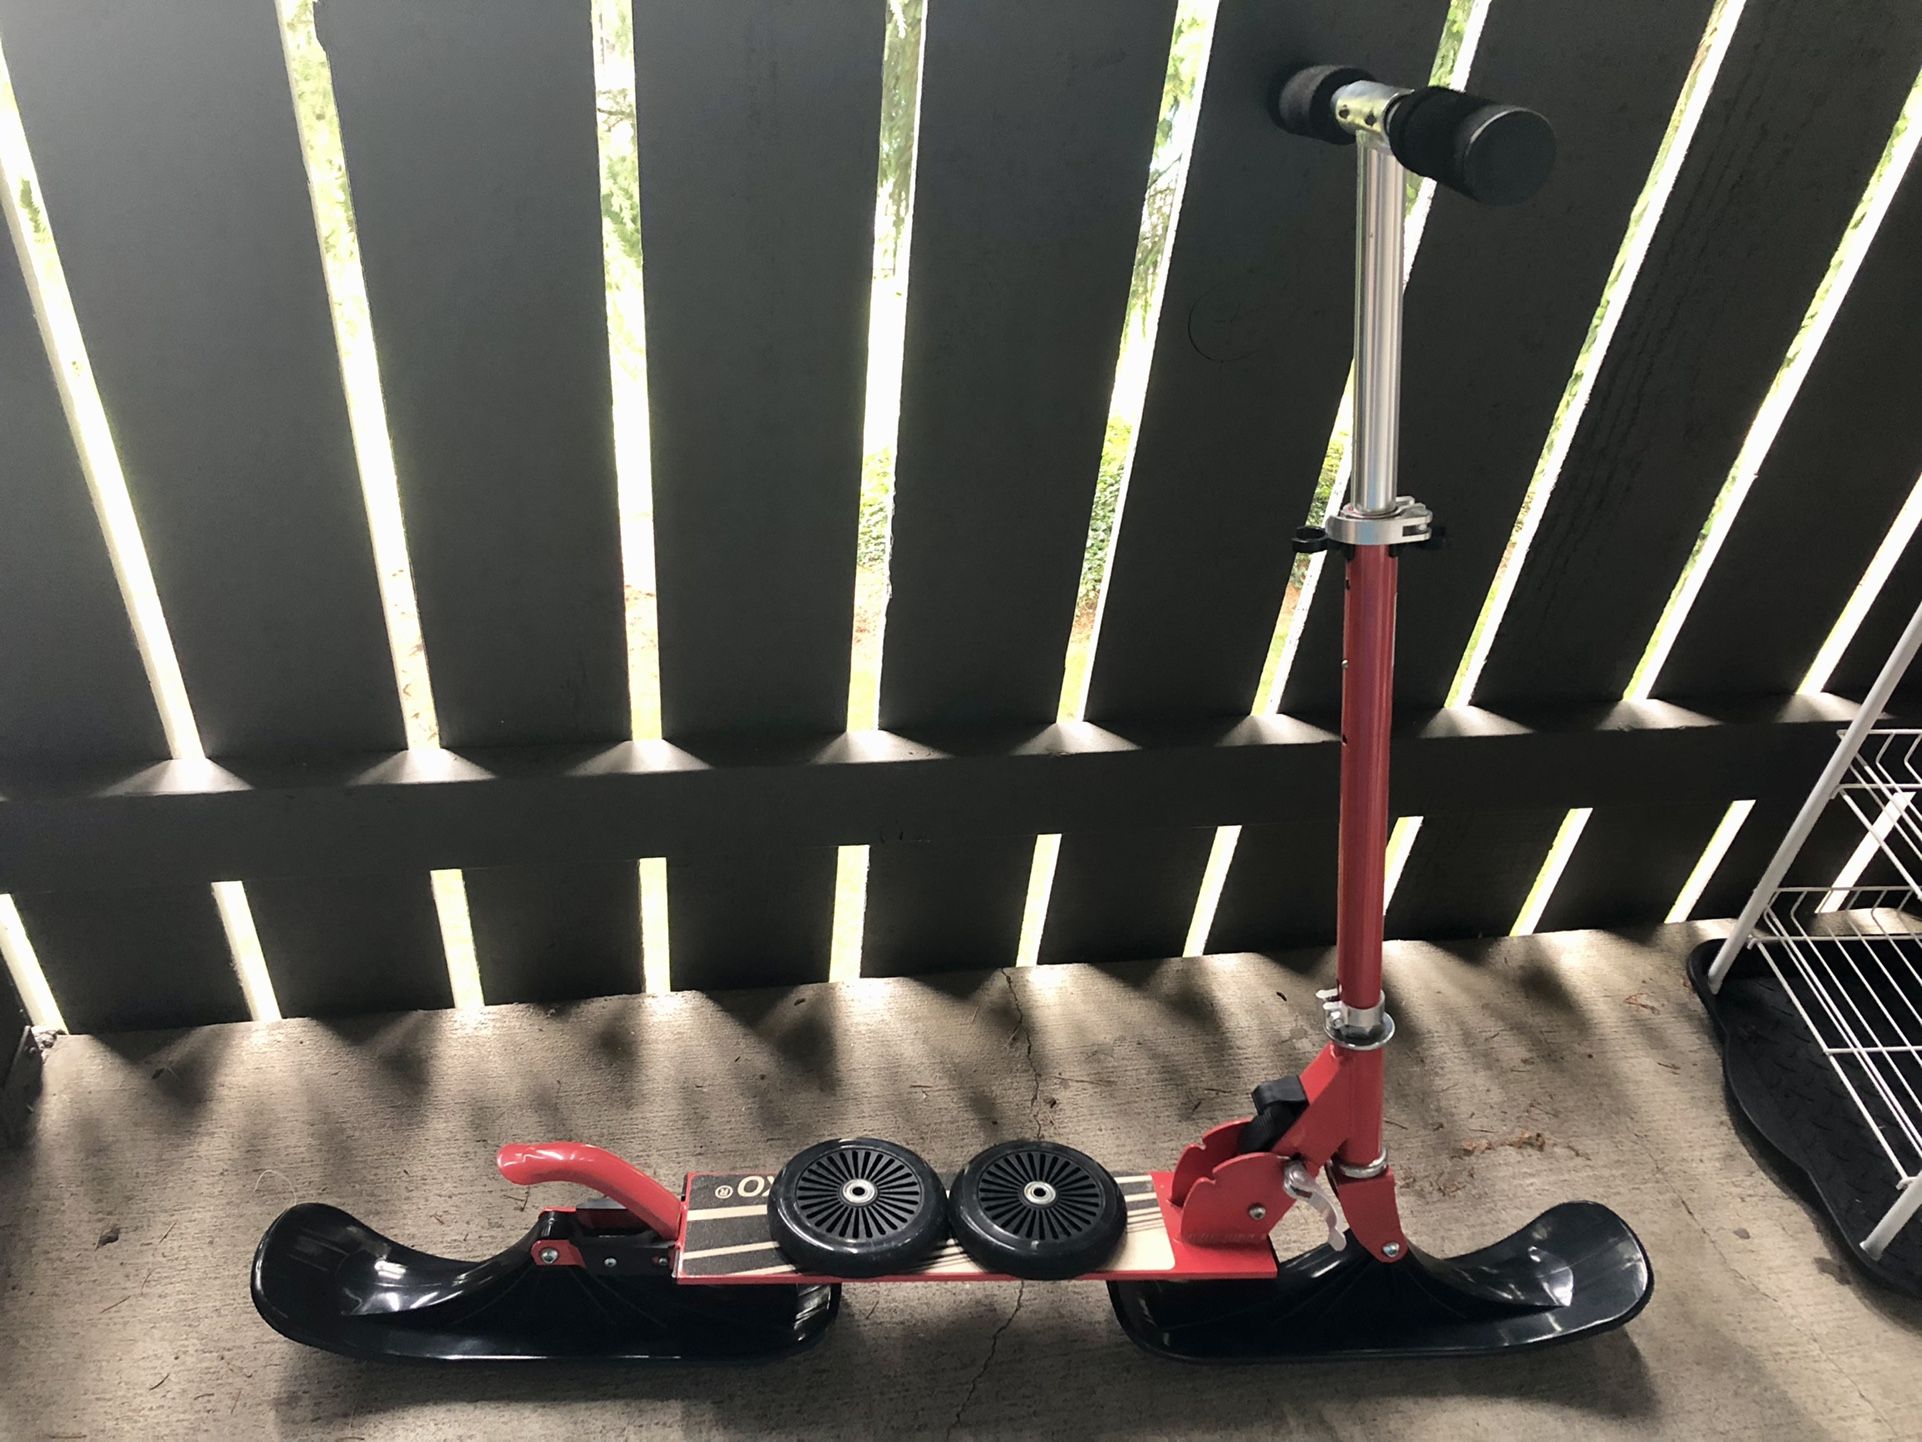 2 Fold Up Scooters - Adjustable height